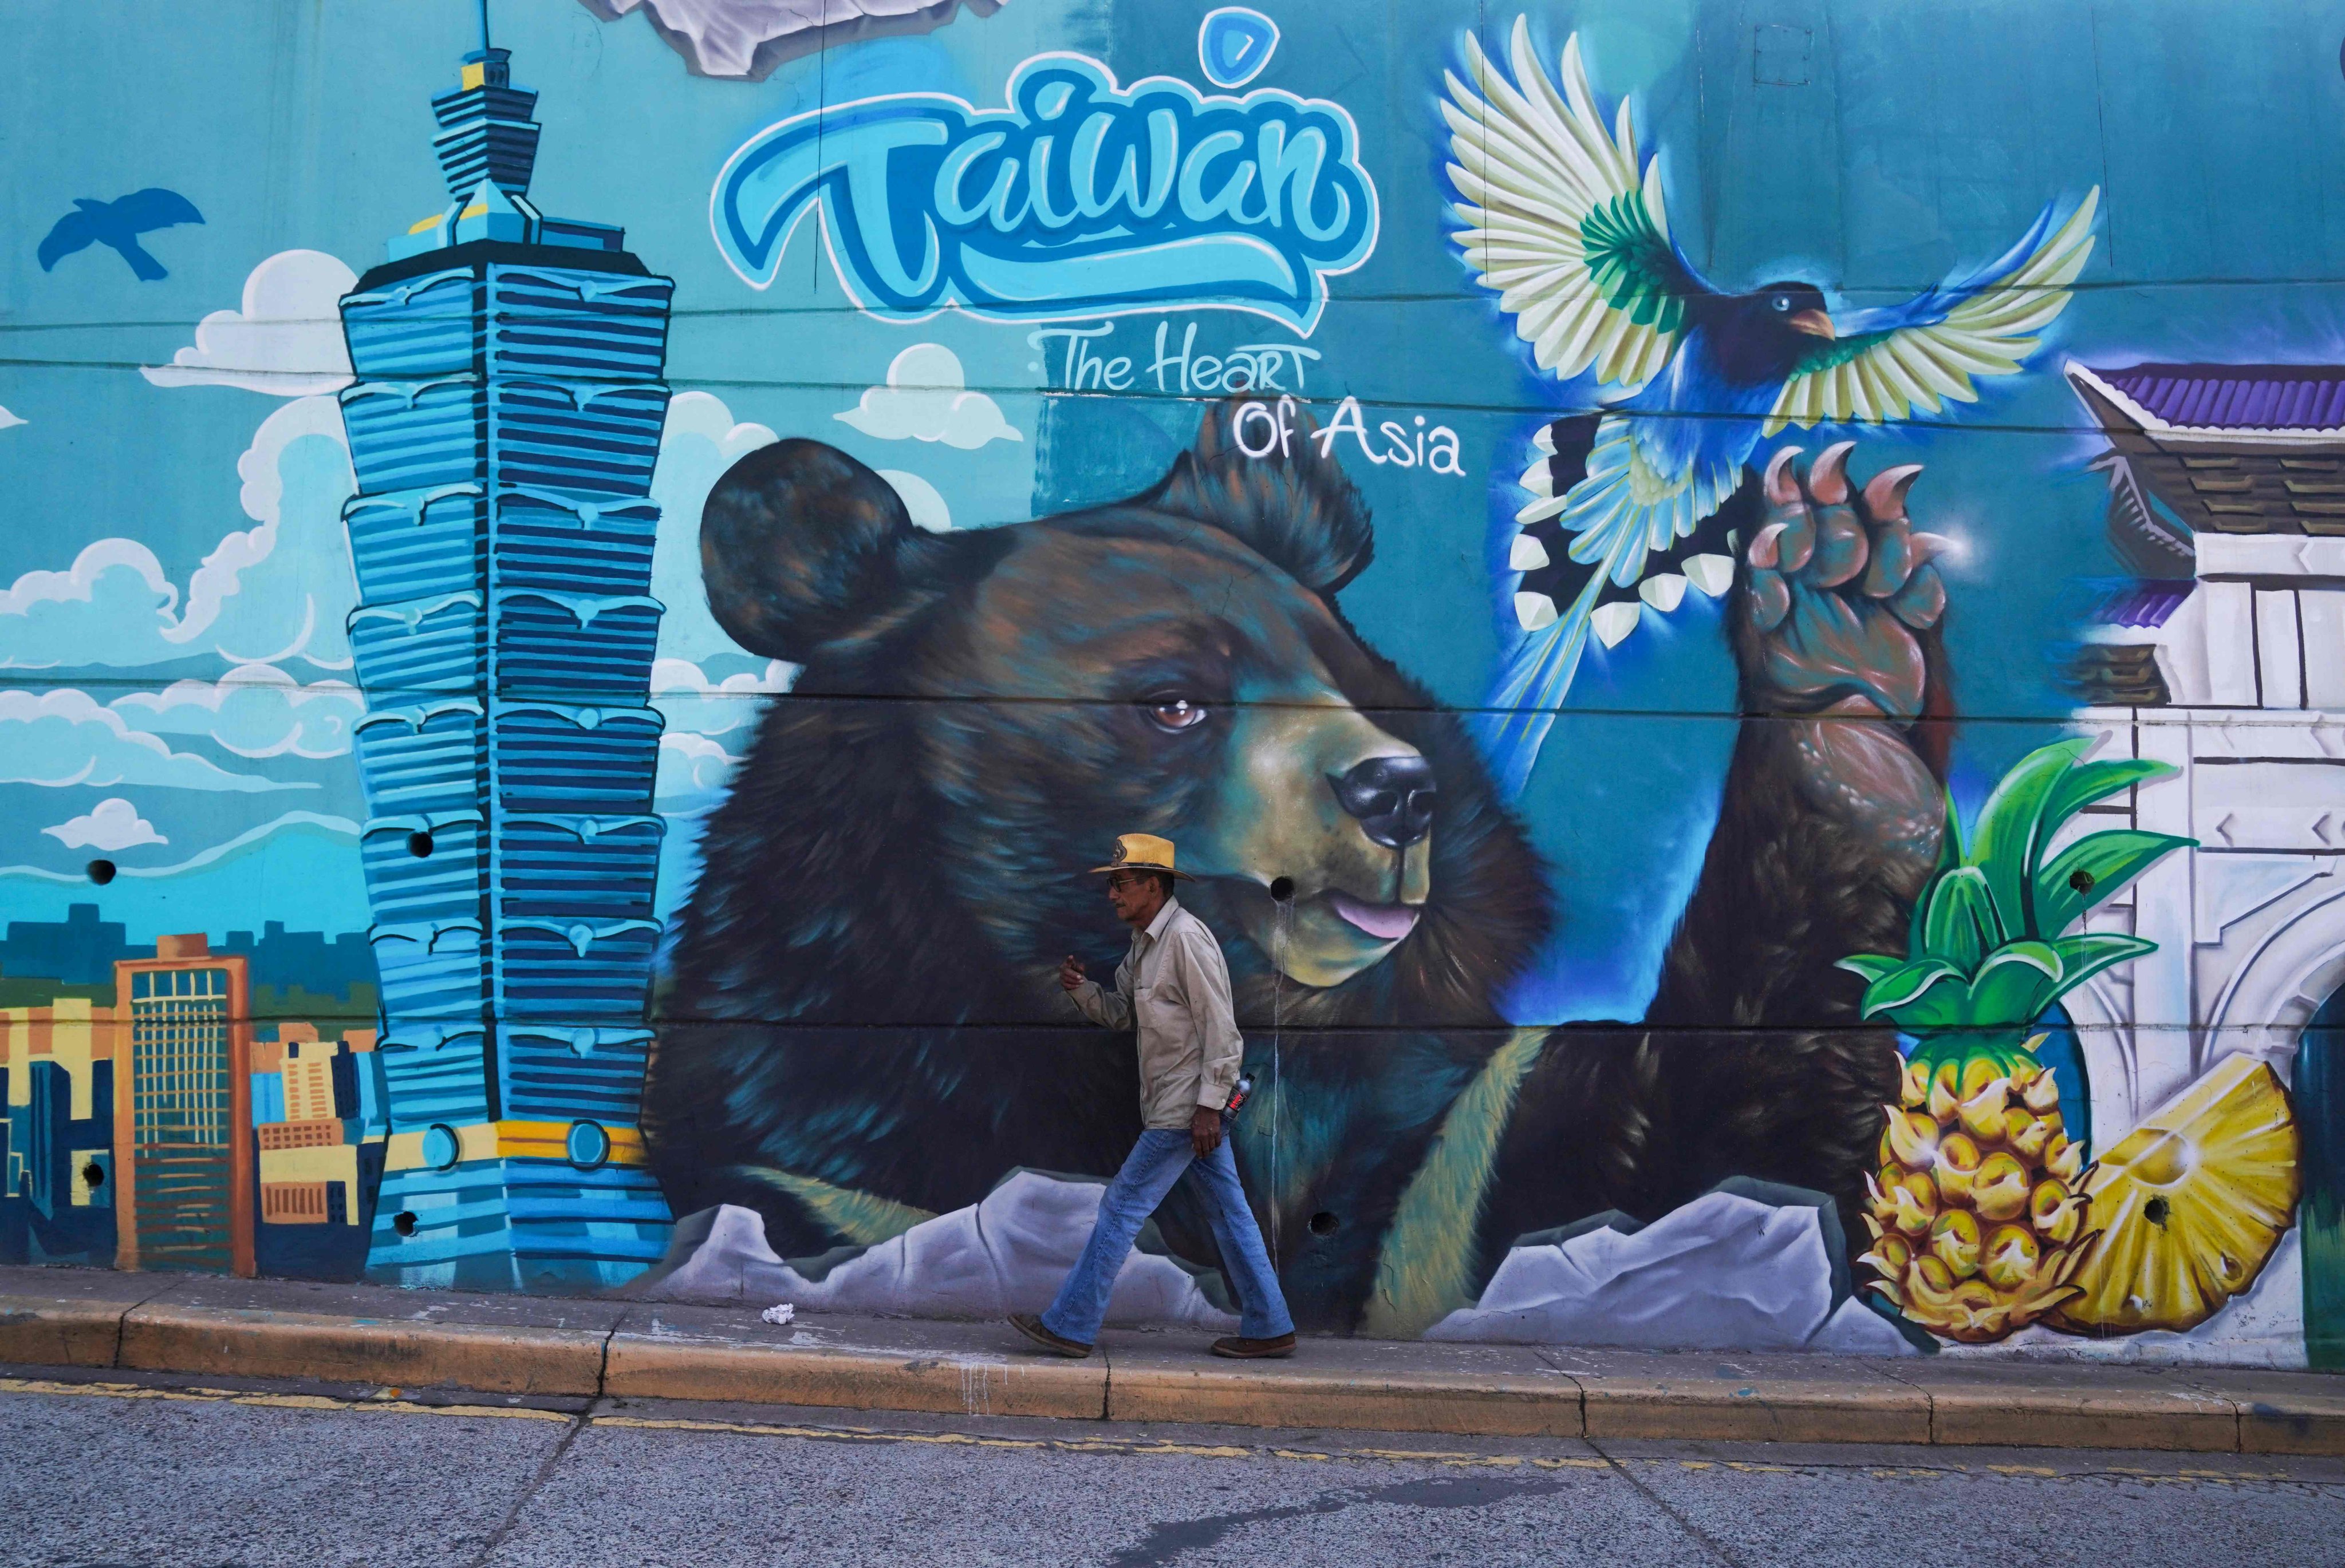 A man walks past a mural alluding to Taiwan in Tegucigalpa, the capital of Honduras, on Wednesday. Photo: AFP